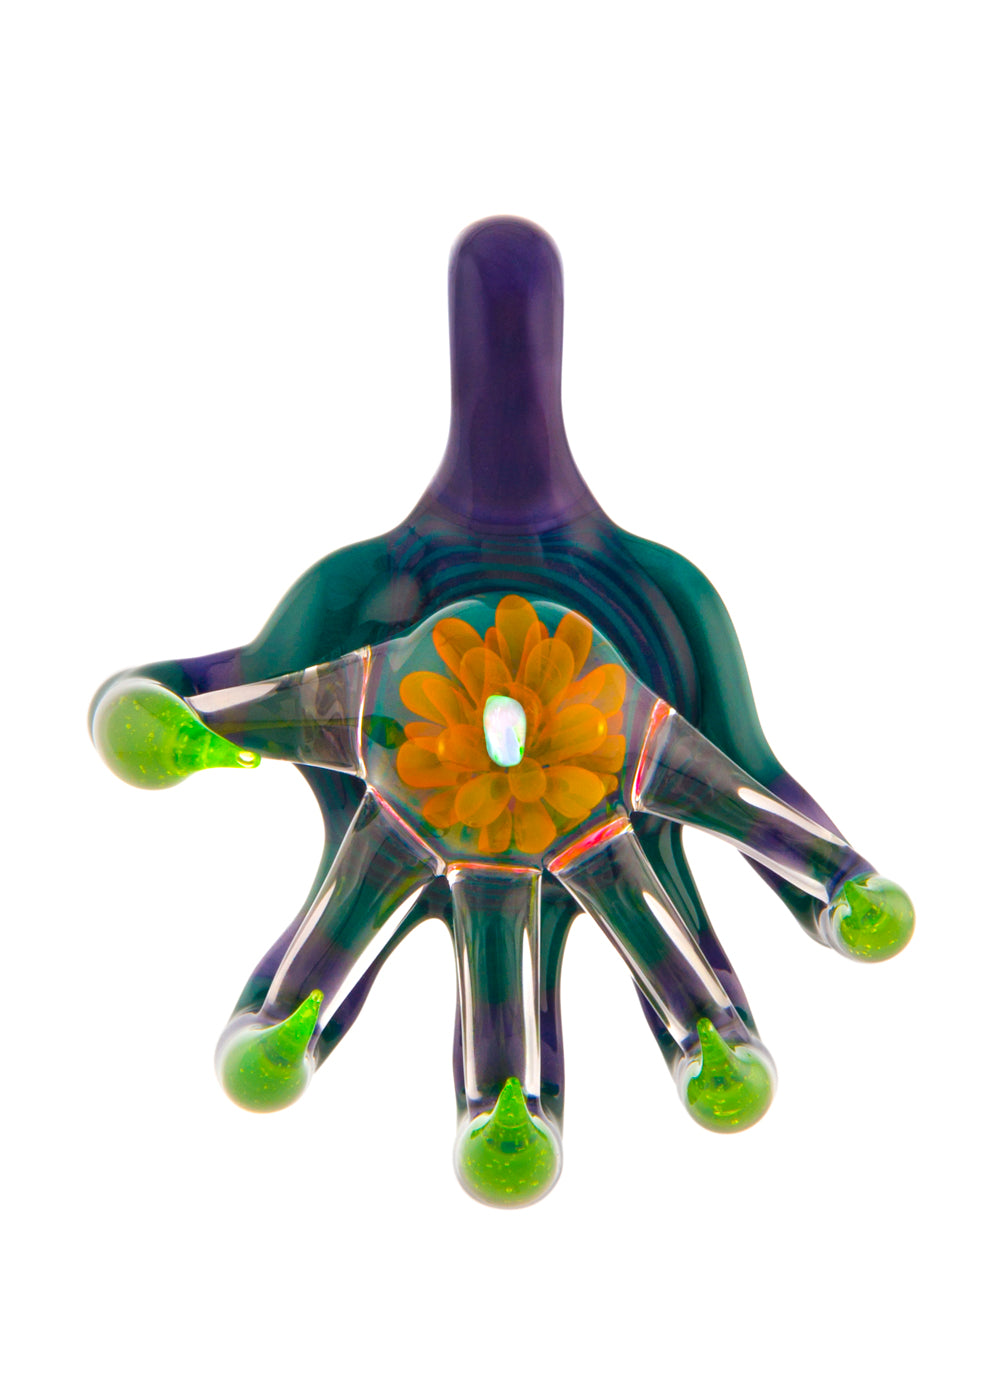 Encalmo Claw Pendant in Purple, Aqua Azul, and Slyme by Curtis Claw